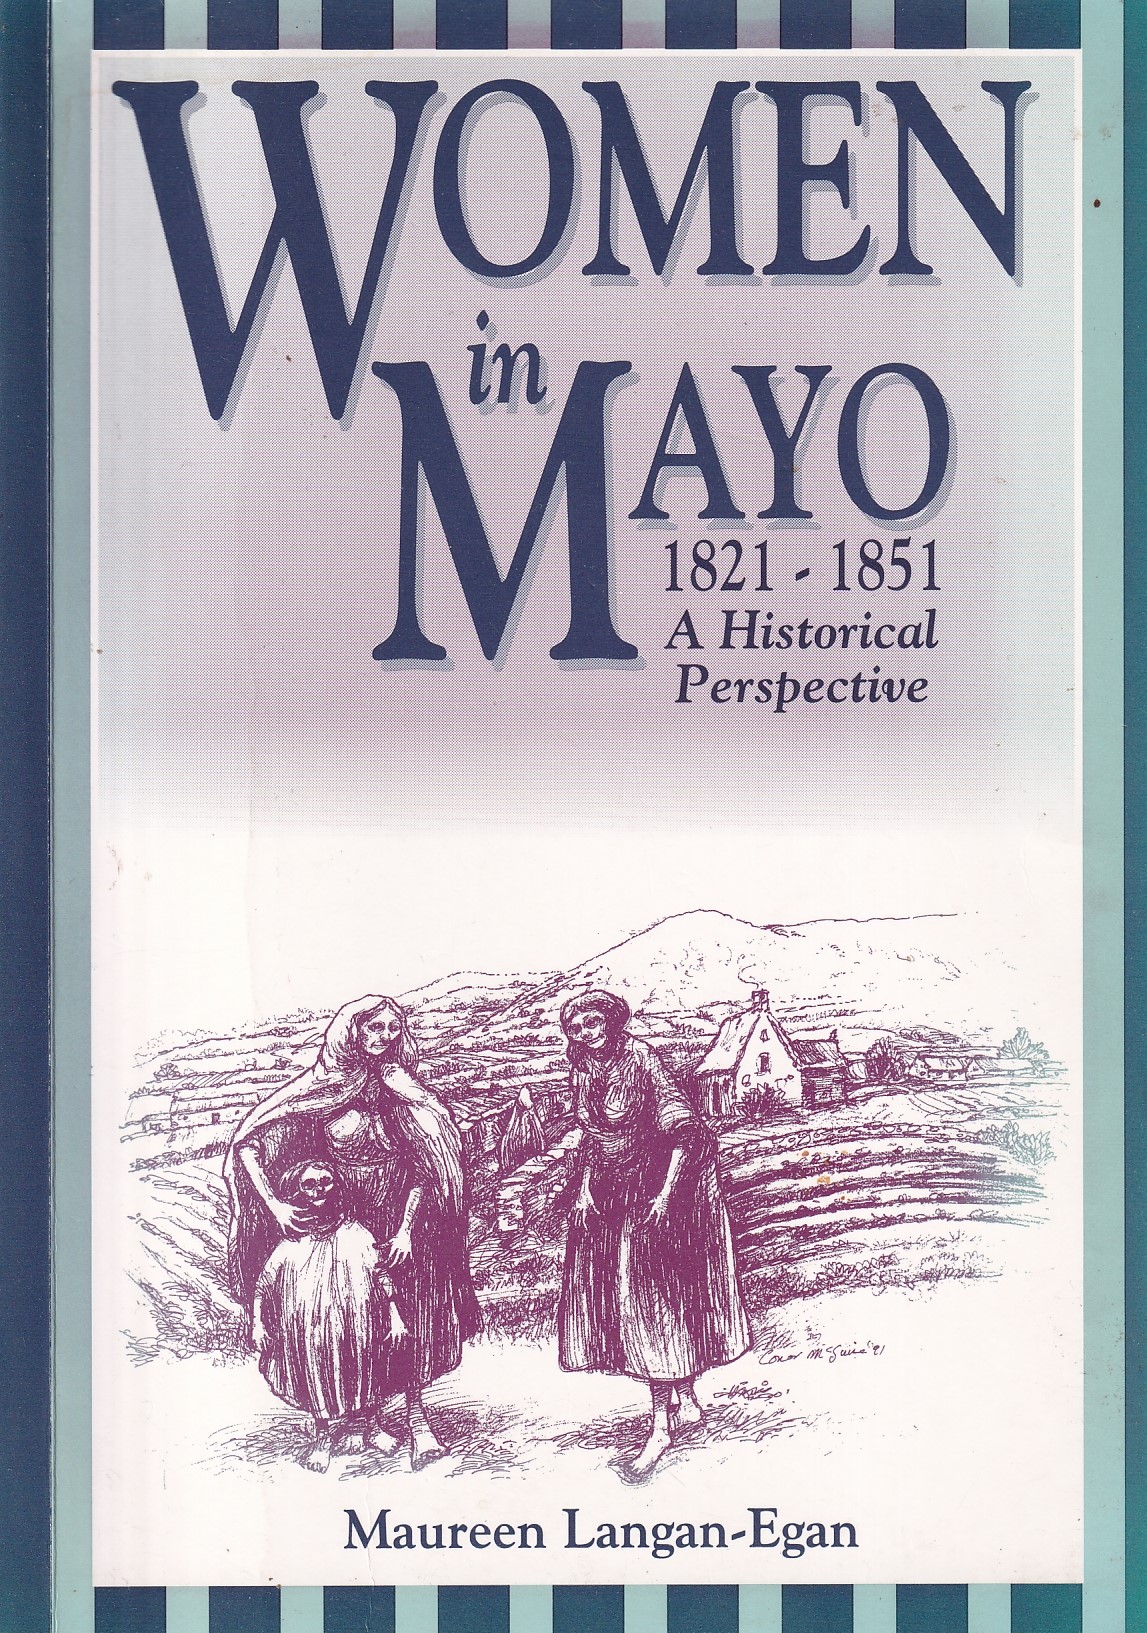 Women in Mayo, 1821-1851: A Historical Perspective by Maureen Langan-Egan